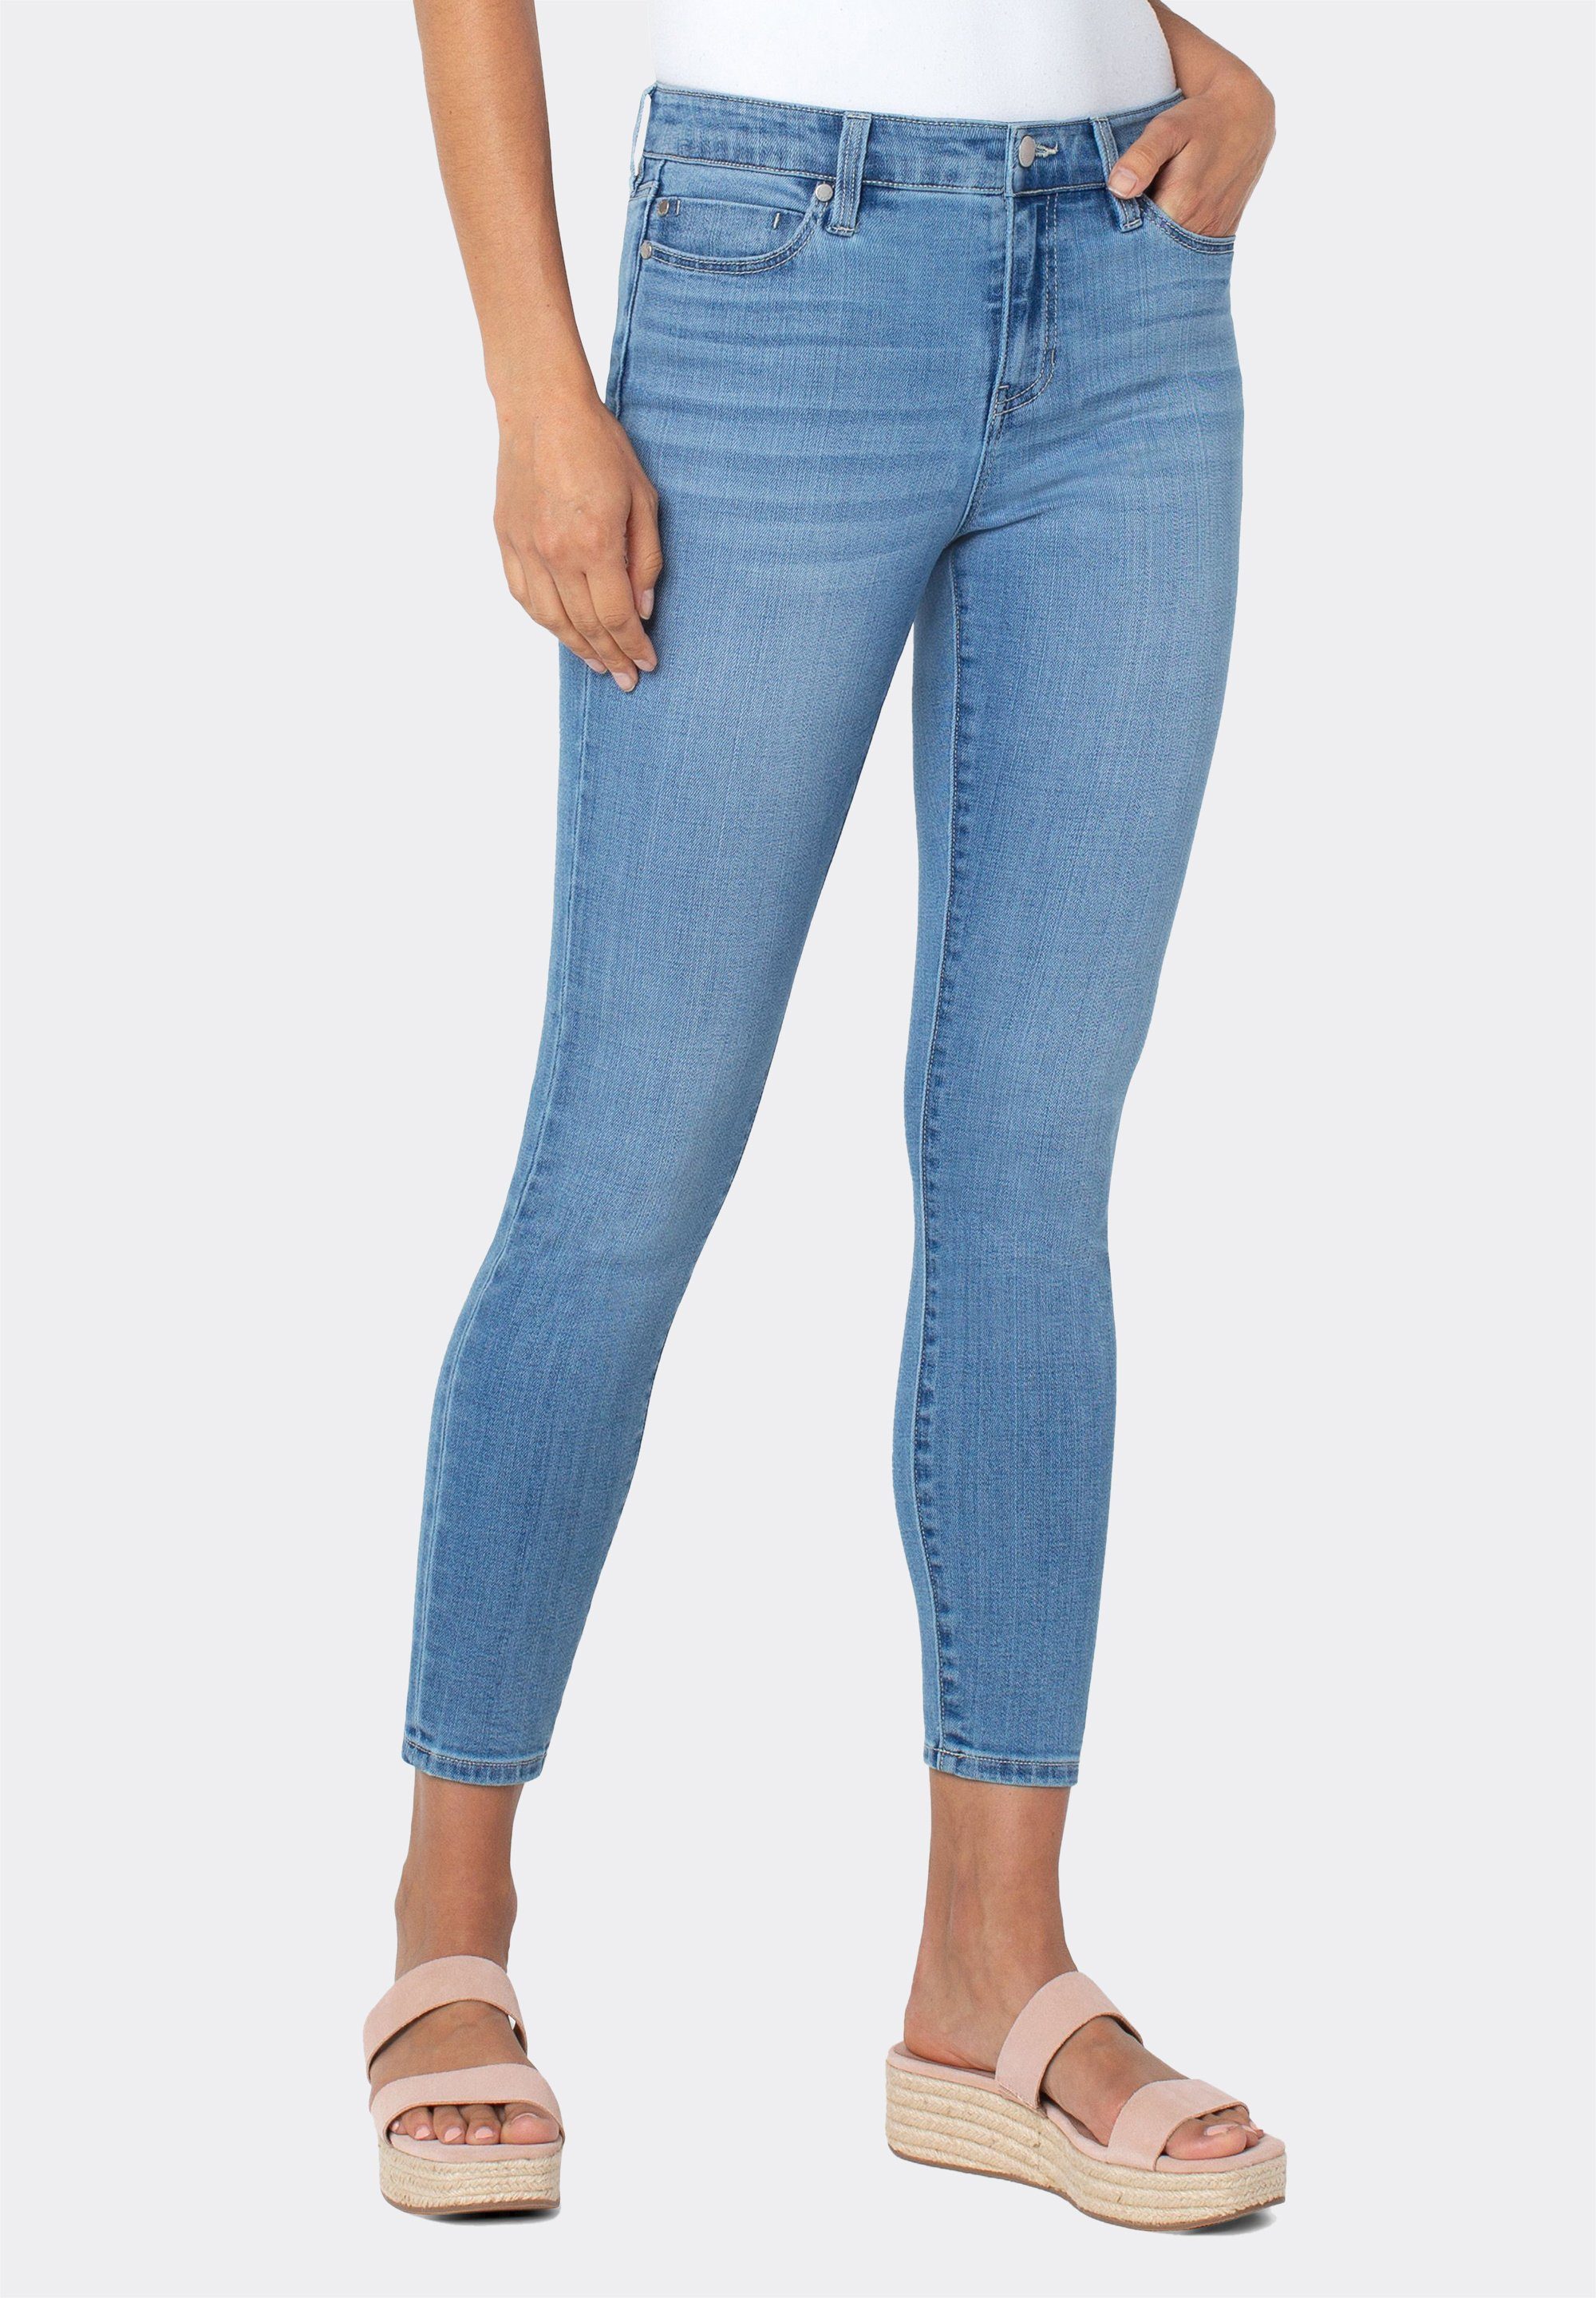 Ankle Ankle-Jeans Liverpool Abby komfortabel Stretchy und Skinny